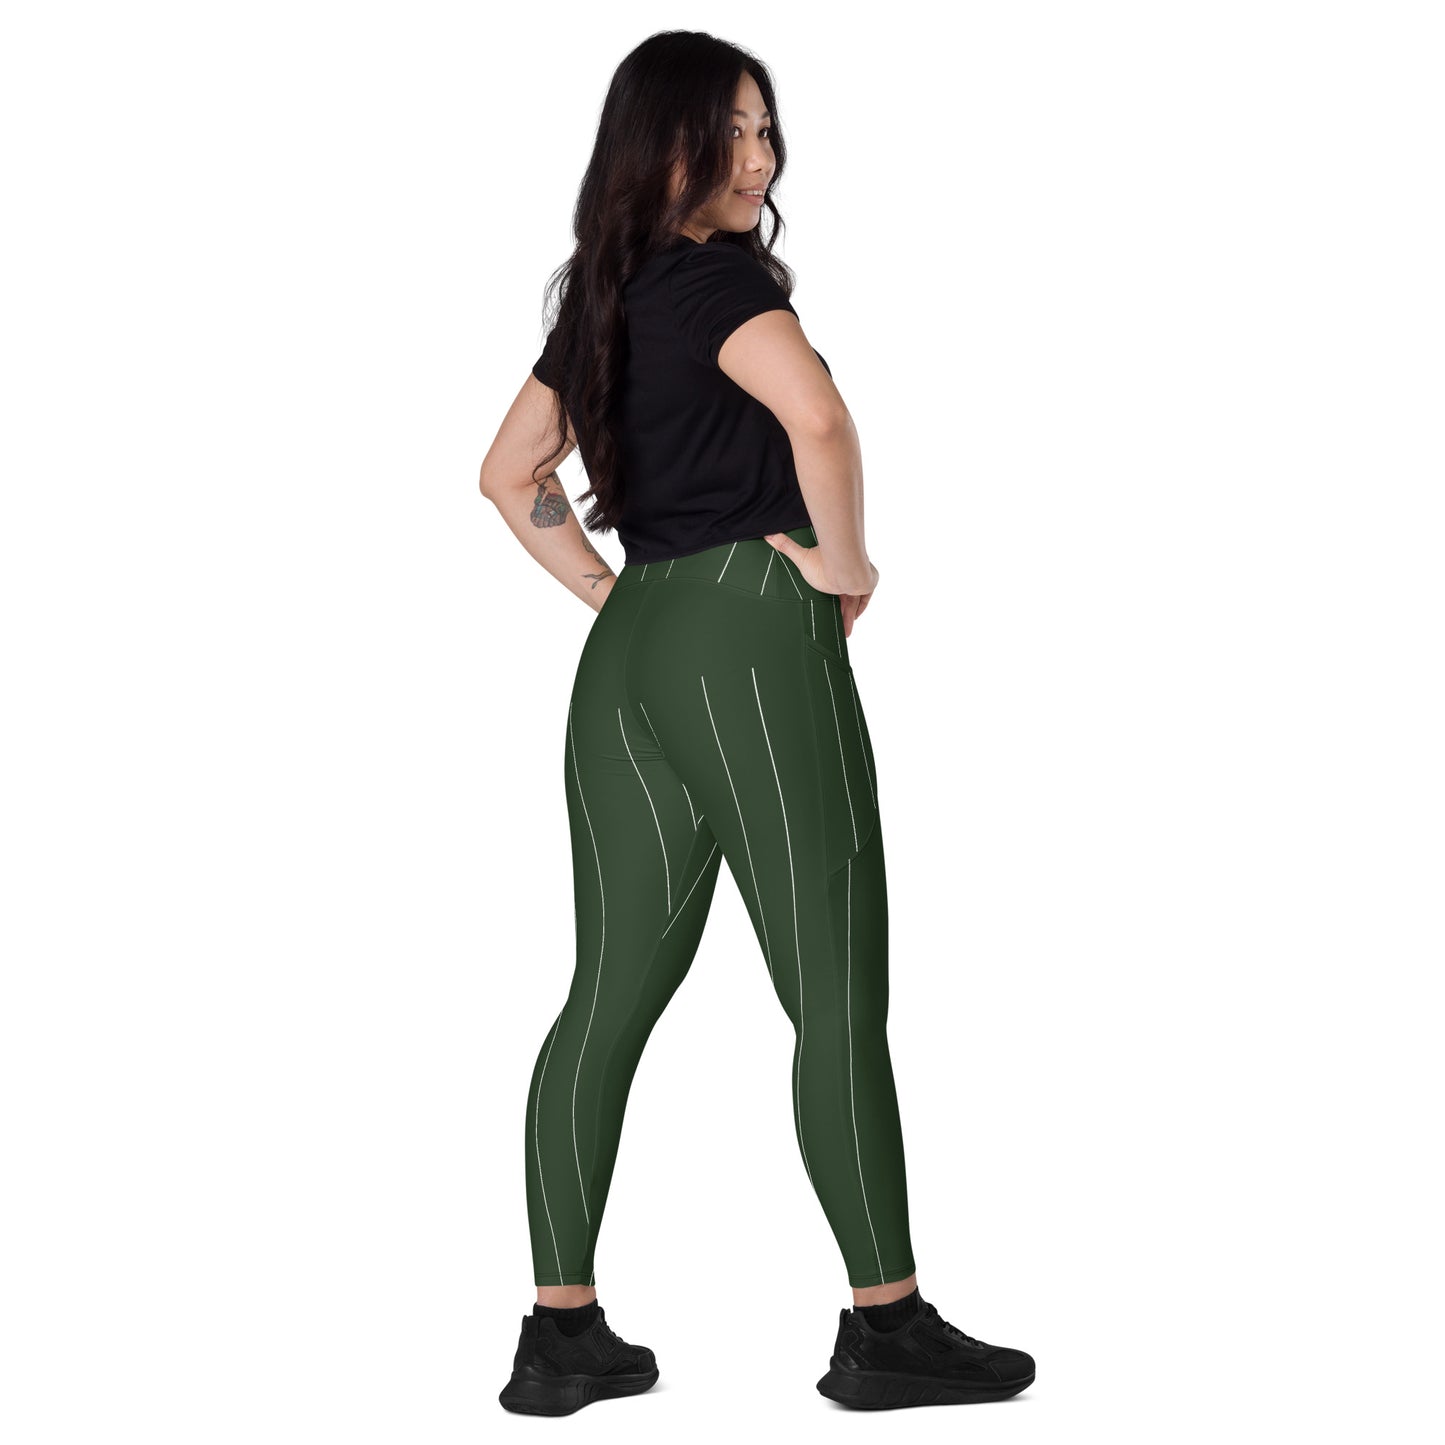 Green Stripe Crossover leggings with pockets